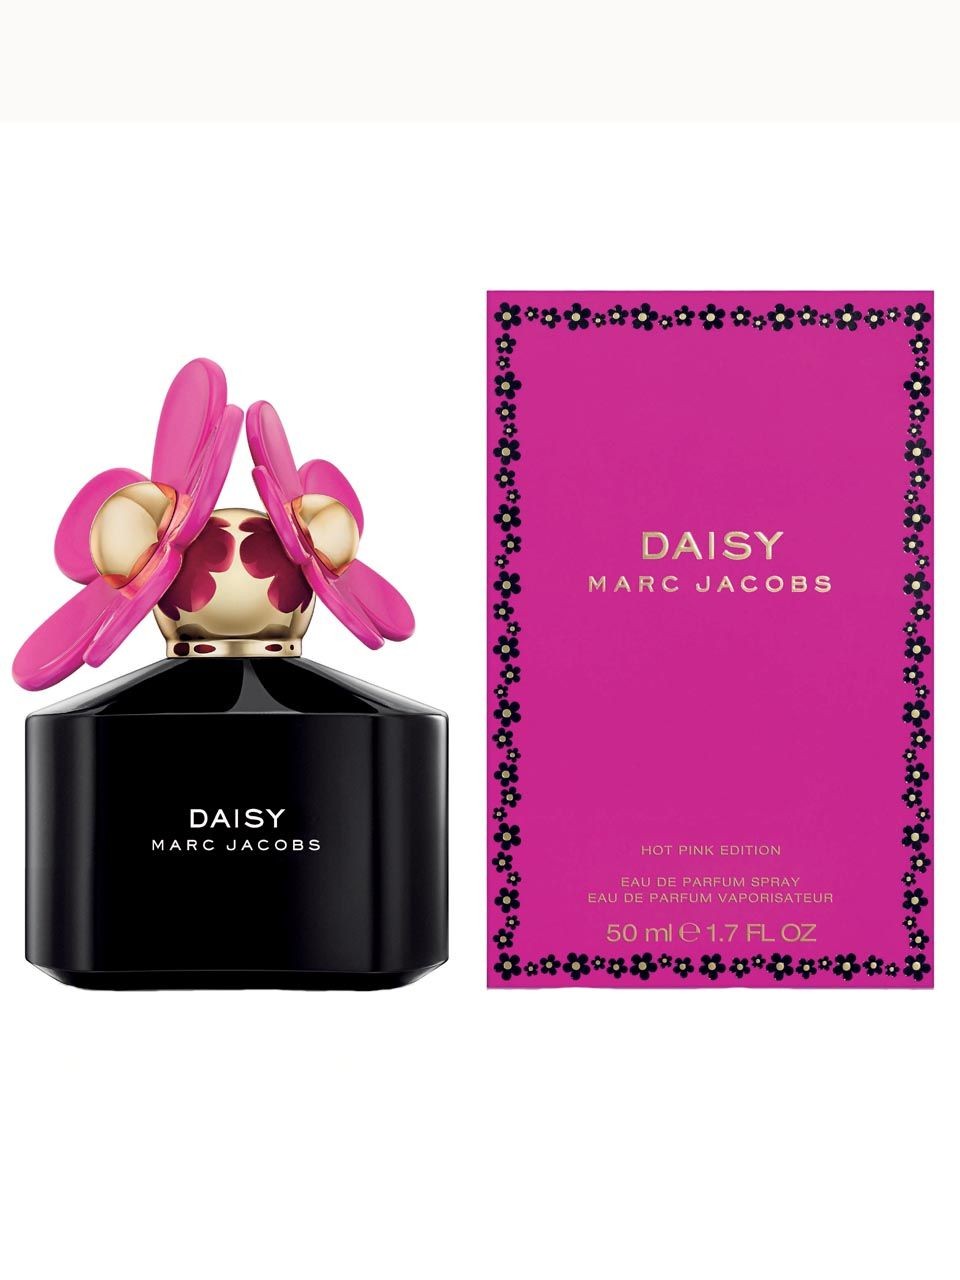 MARC JACOBS DAISY HOT PINK EDITION